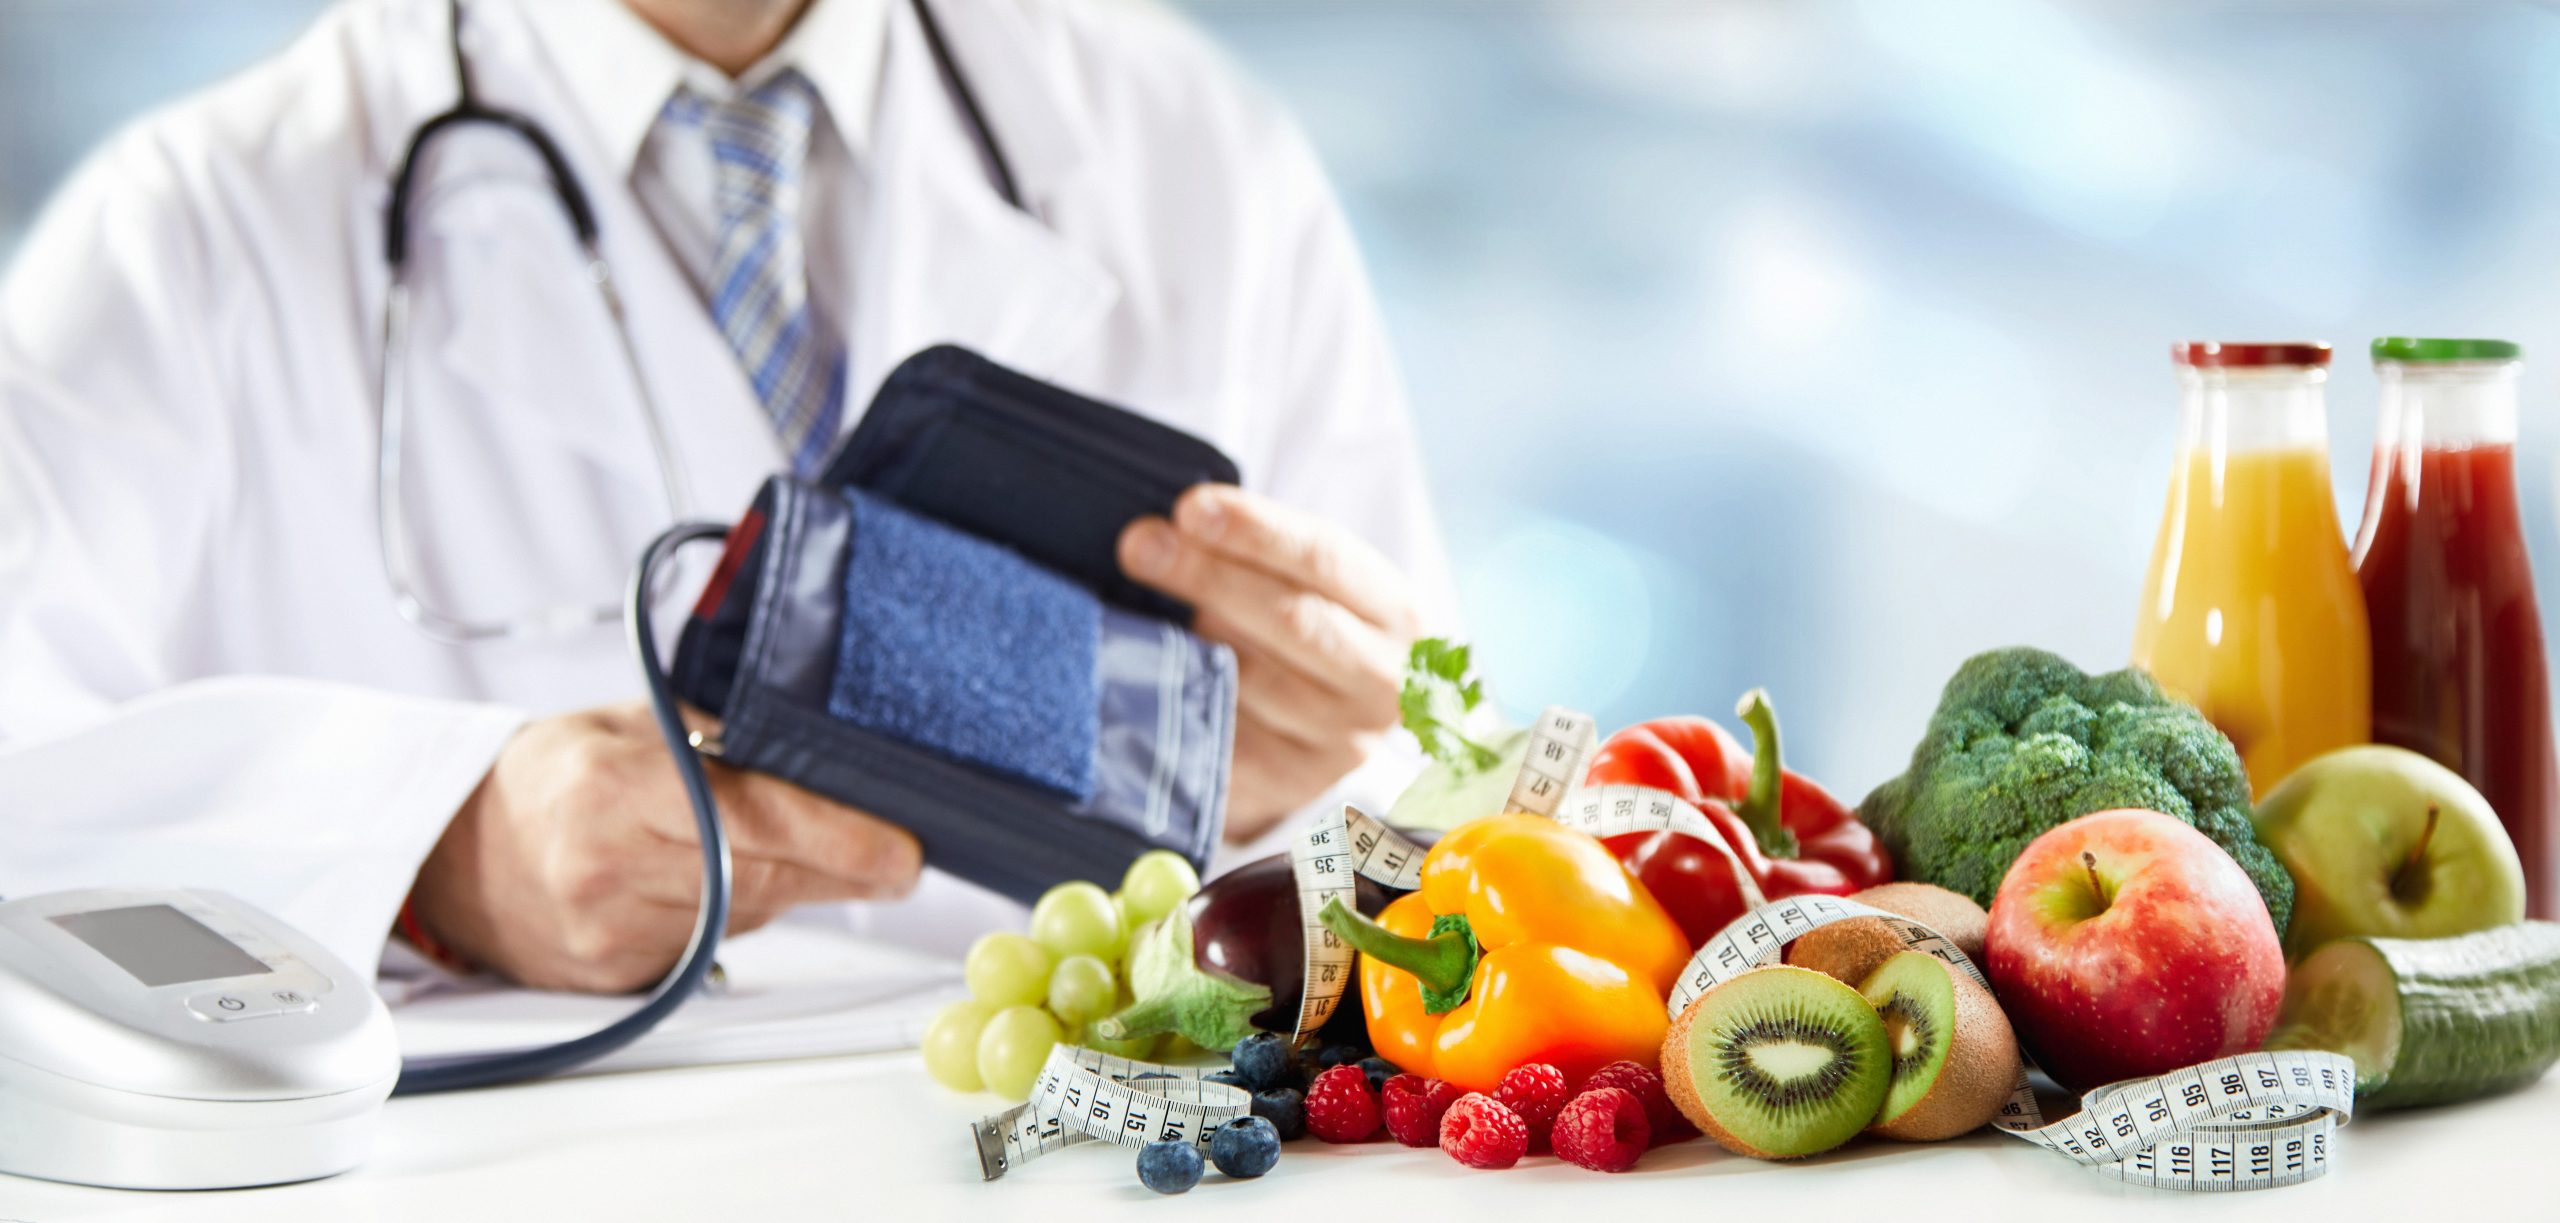 Healthy diet and blood pressure concept with an assortment of colorful fresh fruit, vegetables and smoothies in front of the hands of a doctor holding a sphygmomanometer or cuff in a panorama banner